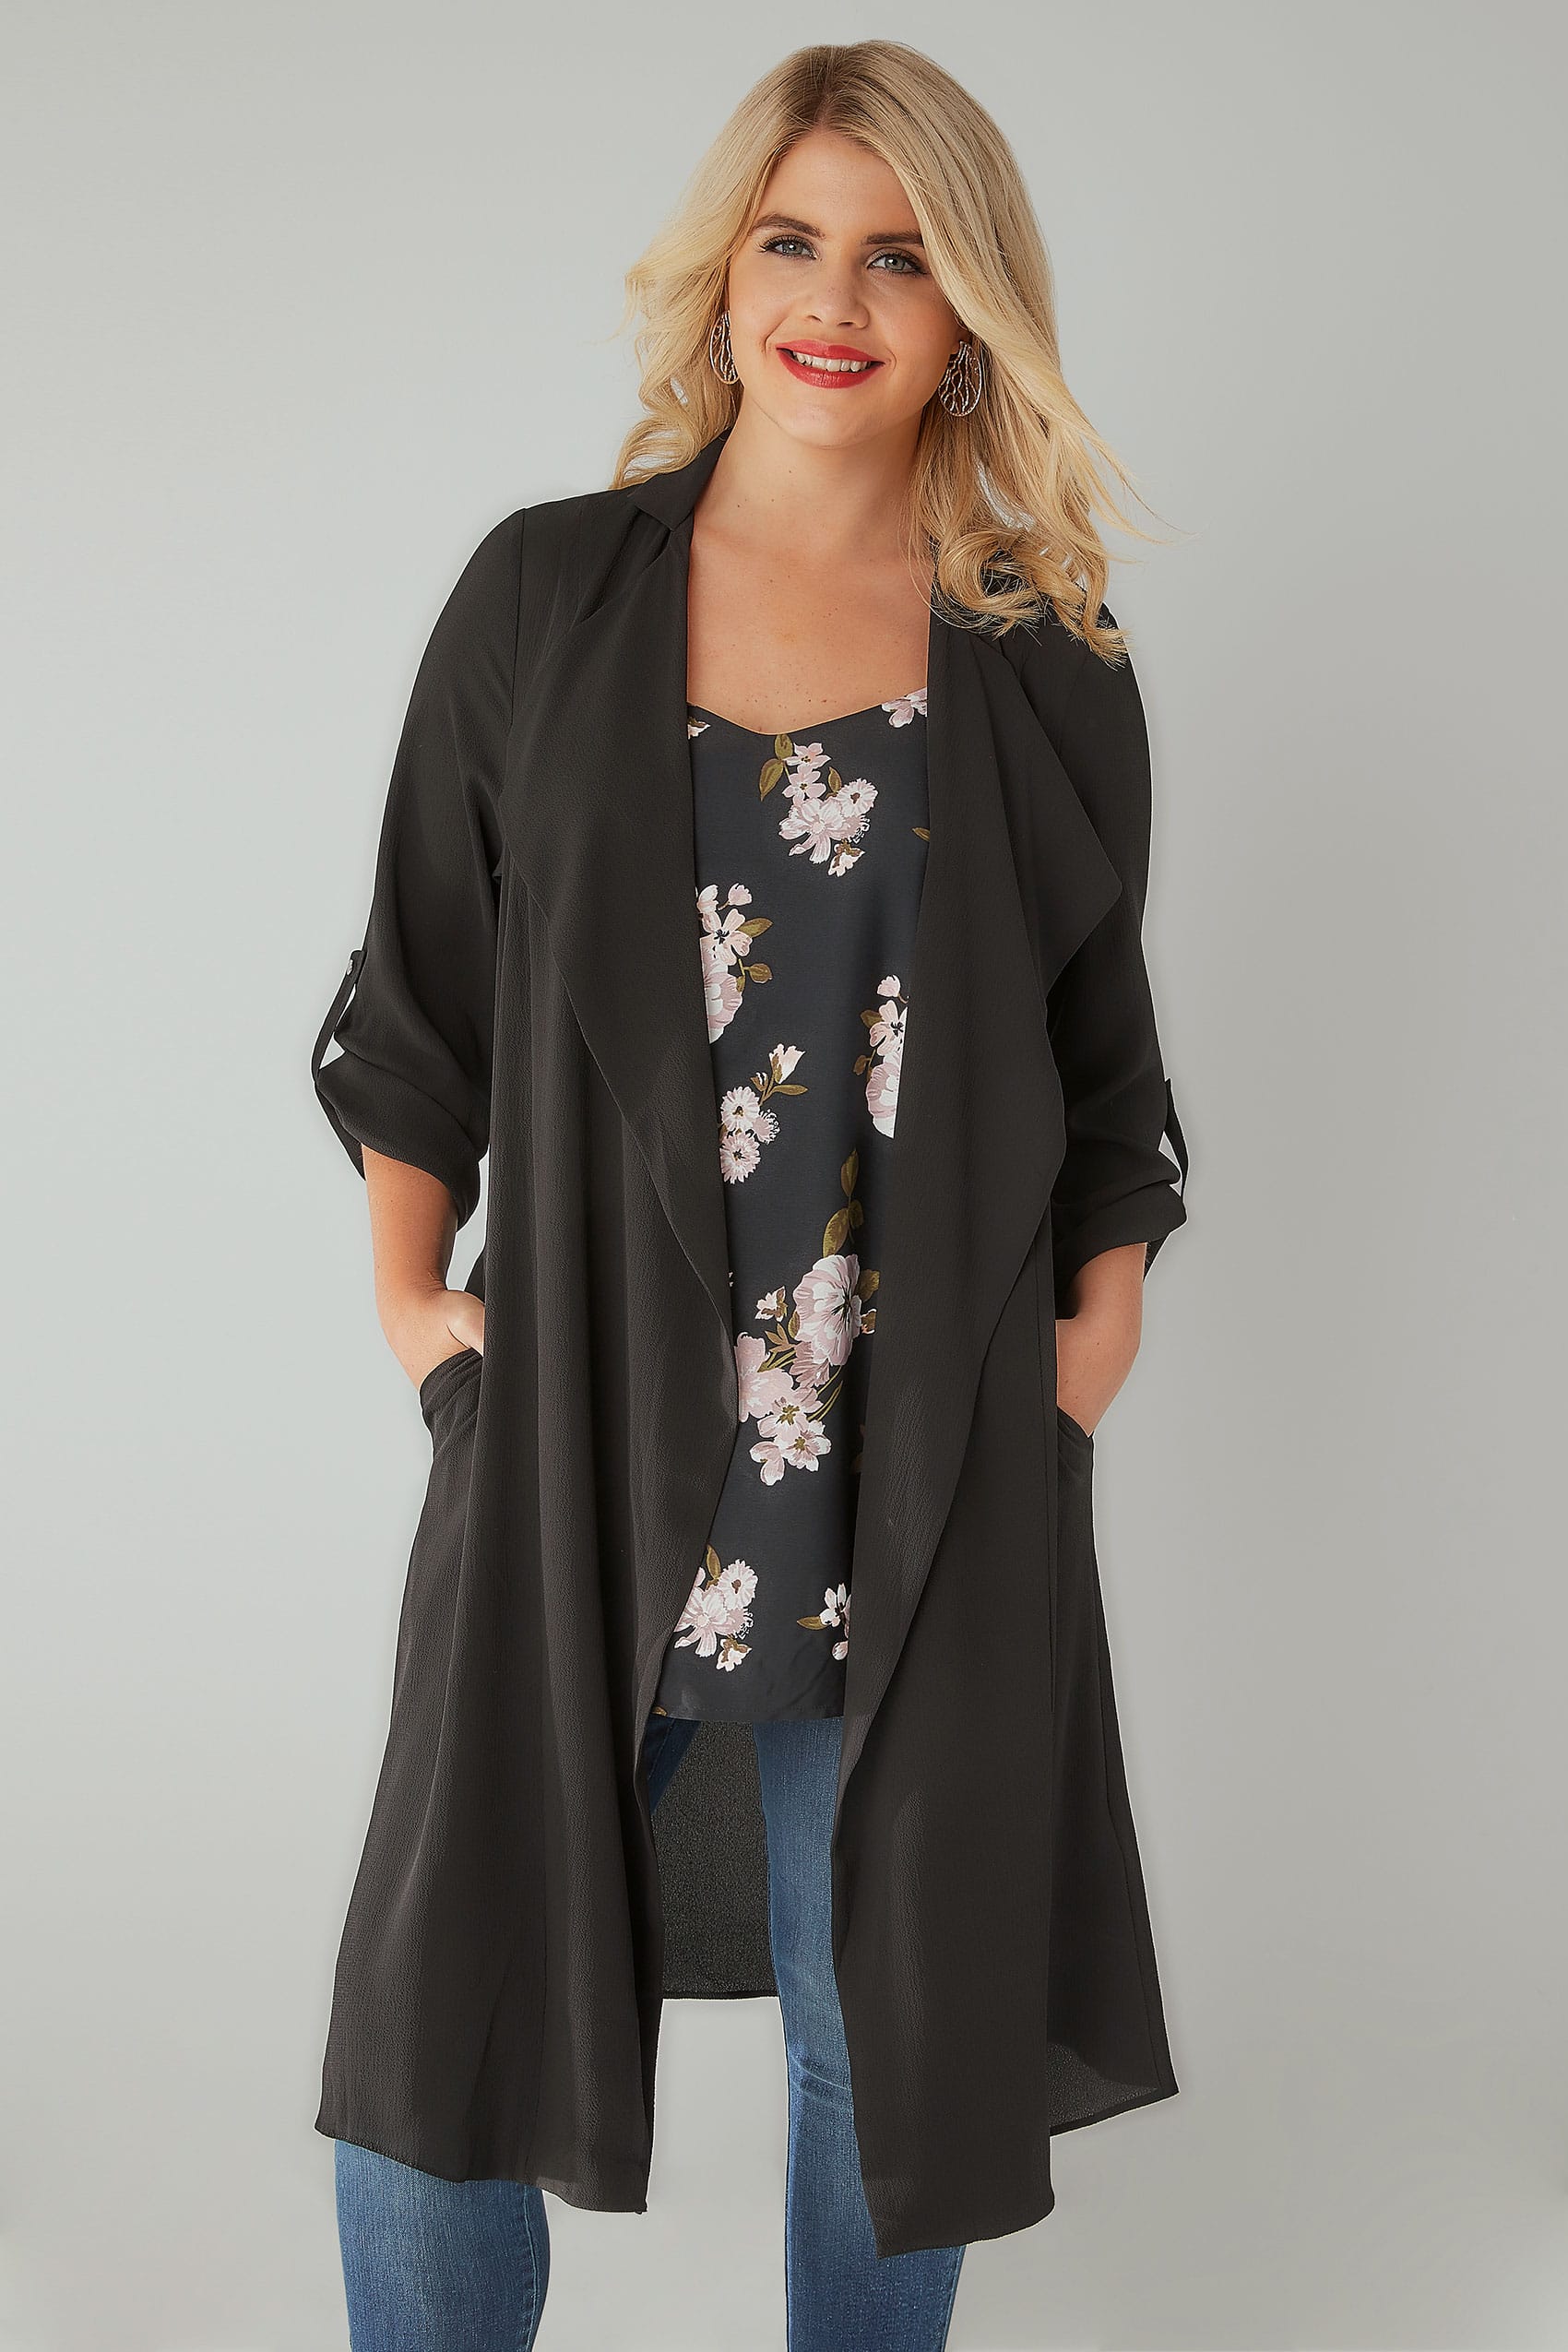 Black Lightweight Duster Jacket With Waterfall Front, Plus size 16 to 361700 x 2550